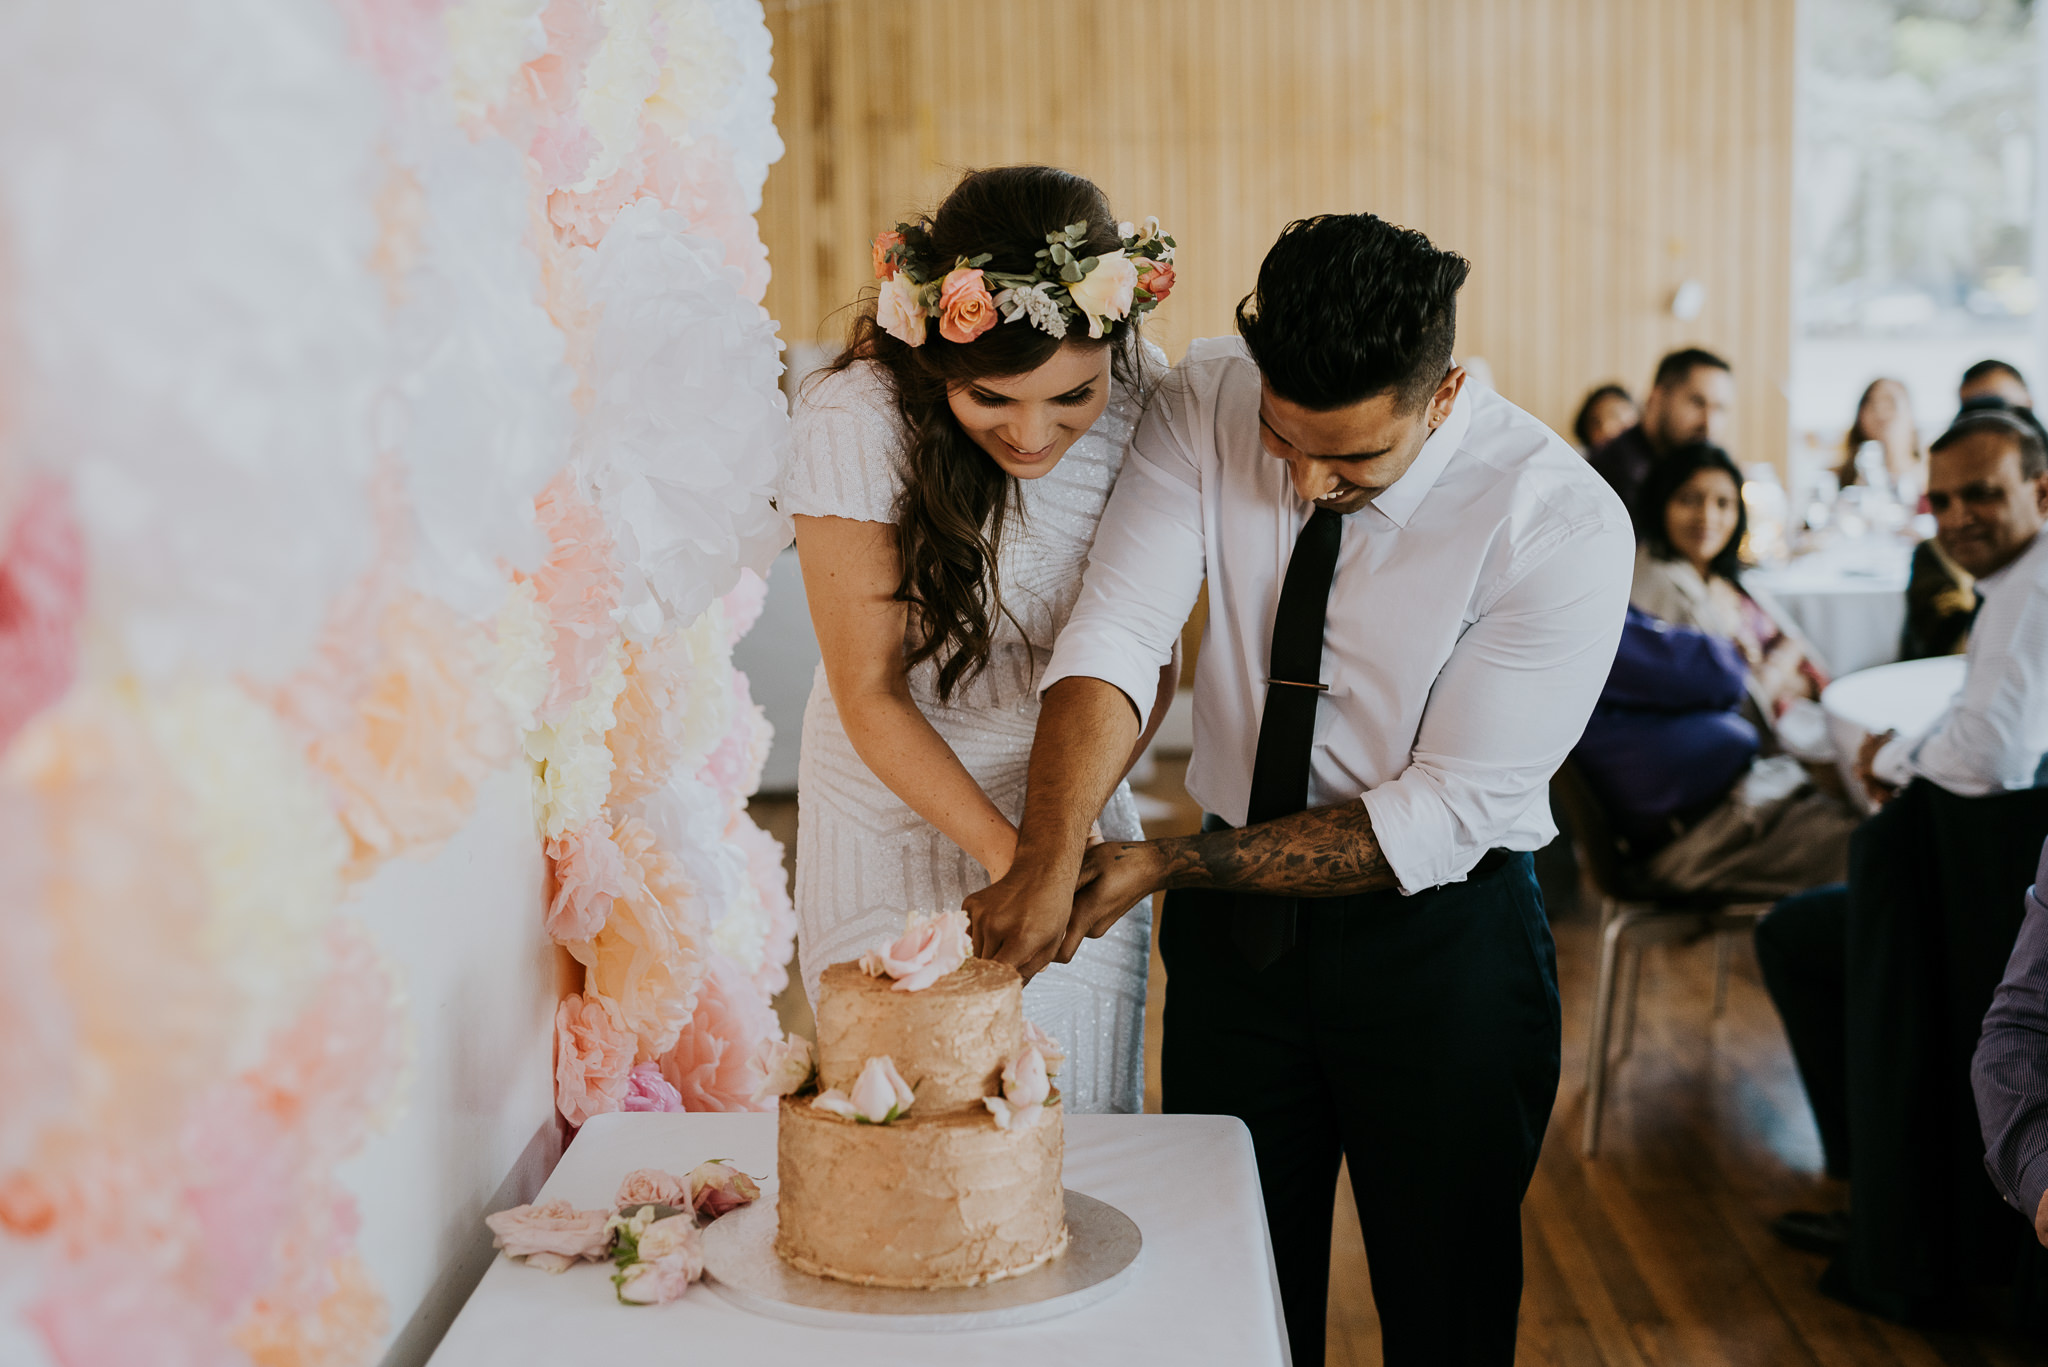 DIY Auckland Wedding, Cake with gold frosted icing